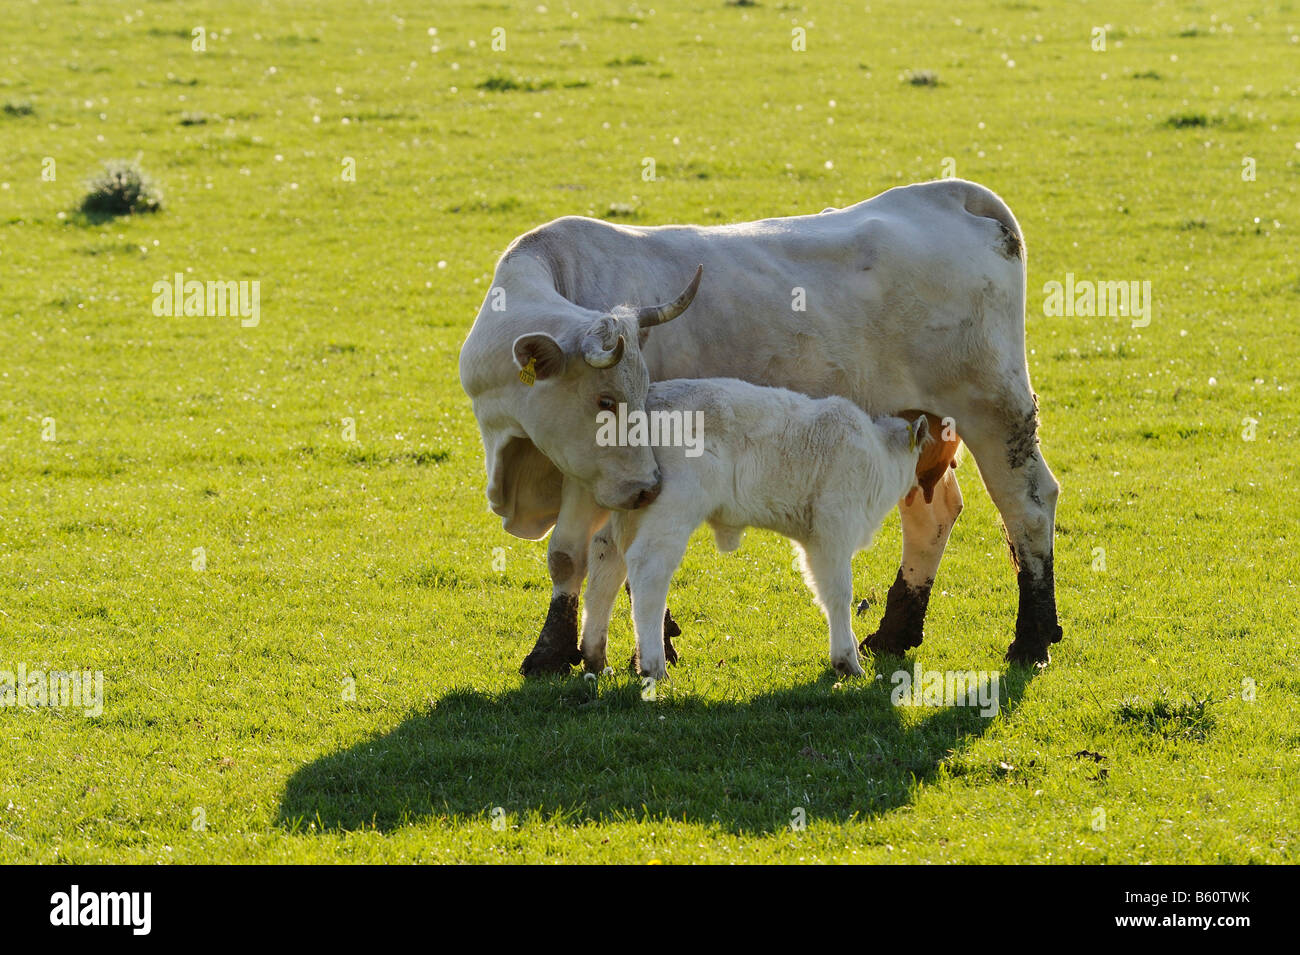 Charolais cow with calf standing on a pasture, Gerolzhofen, Lower Franconia, Bavaria Stock Photo